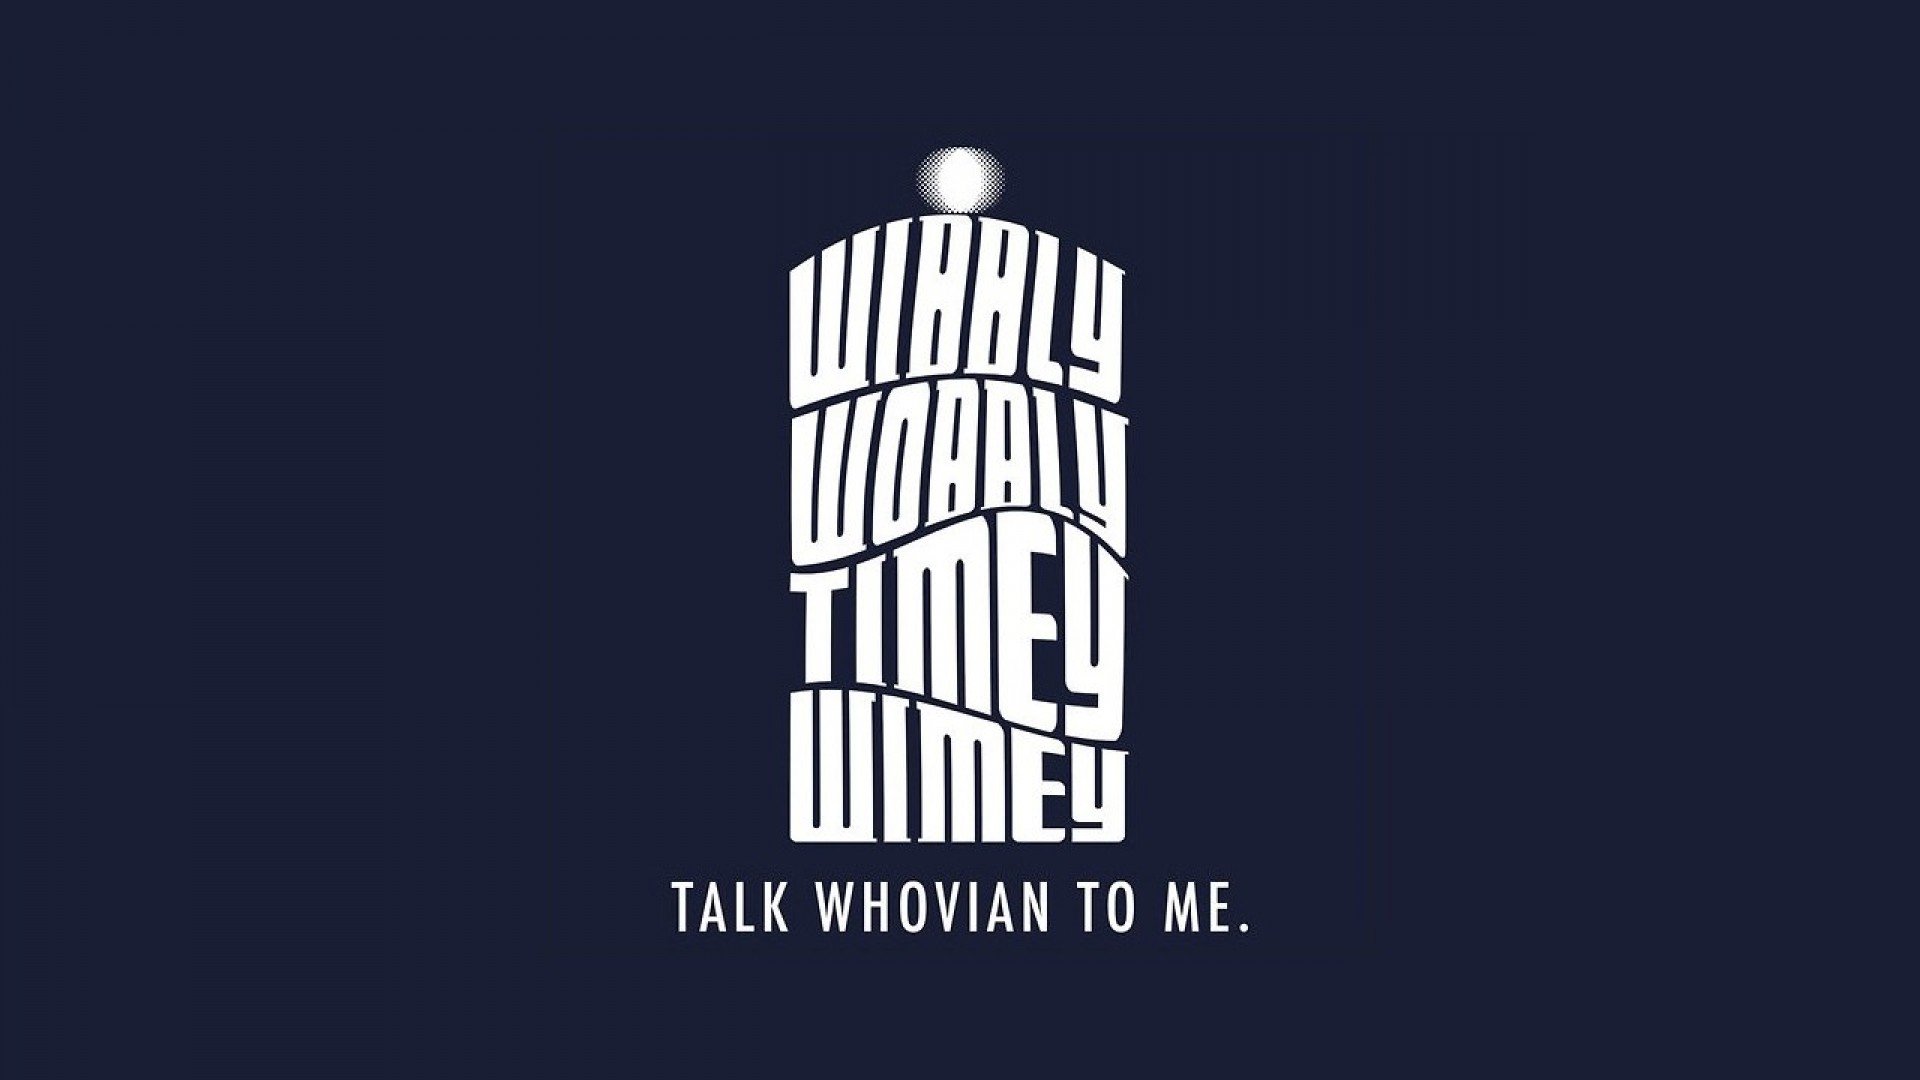 Doctor Who Wallpaper Archives - Page 7 of 16 - WideWallpaper.info ...